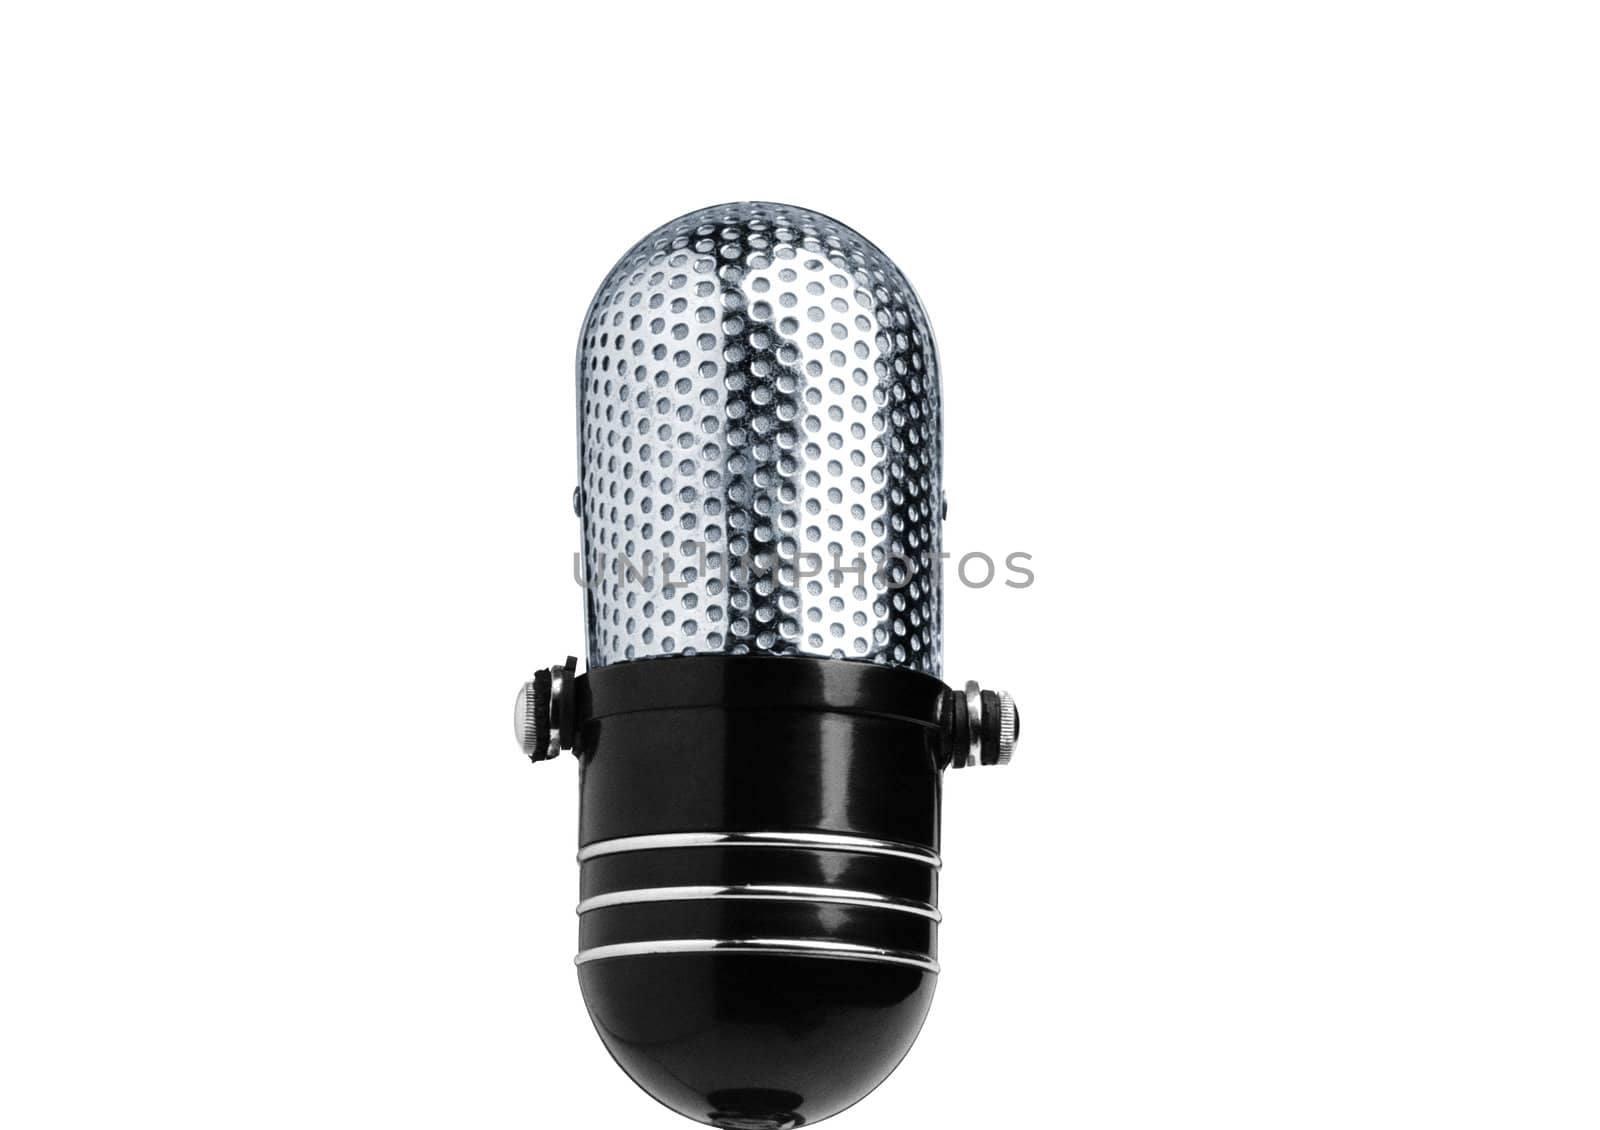 Vintage Microphone Isolated Over White Background by shutswis